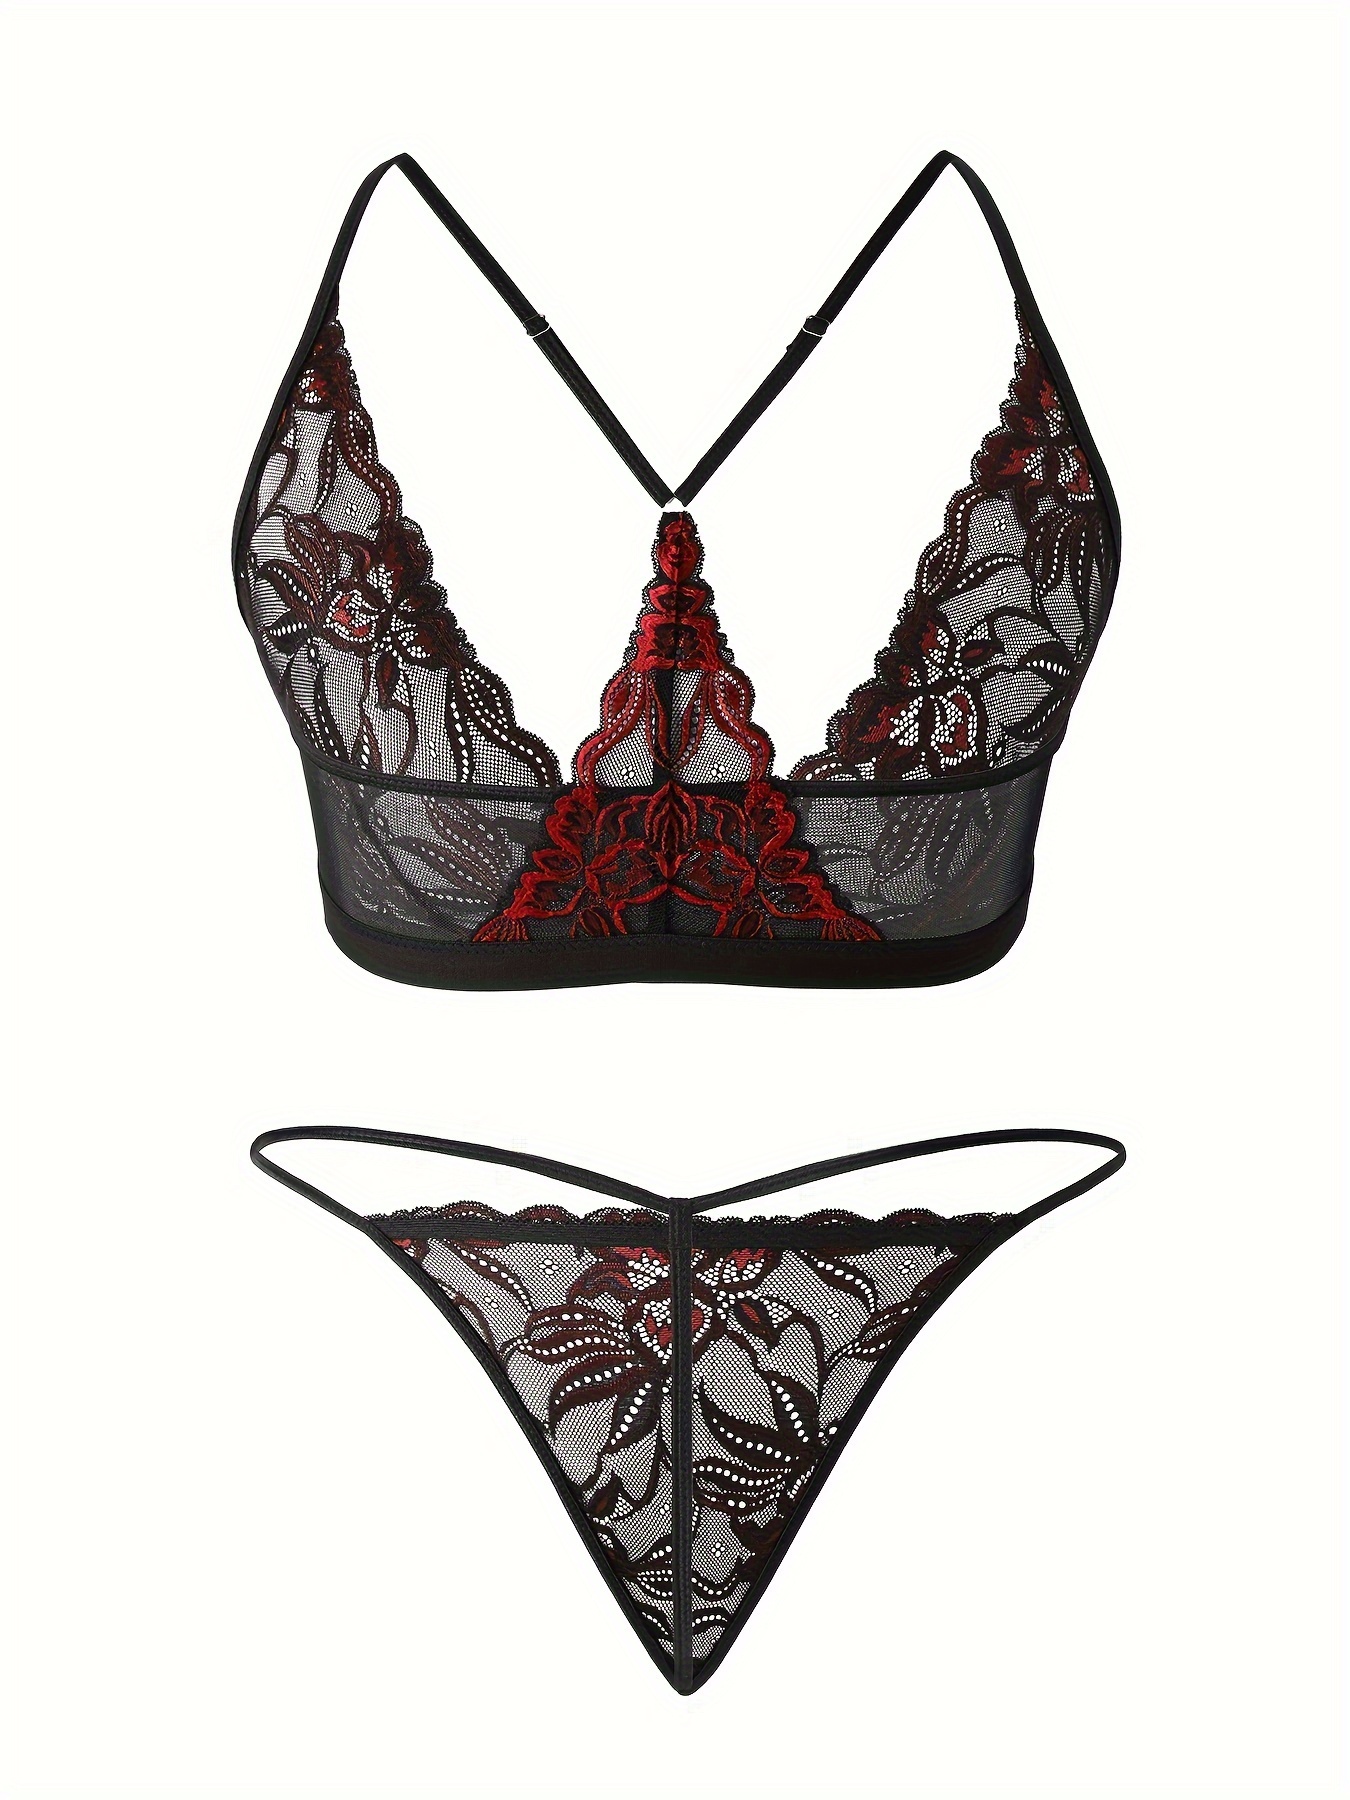 Bra and Panty Sets for Women, Women's Floral Embroidery 2 Piece